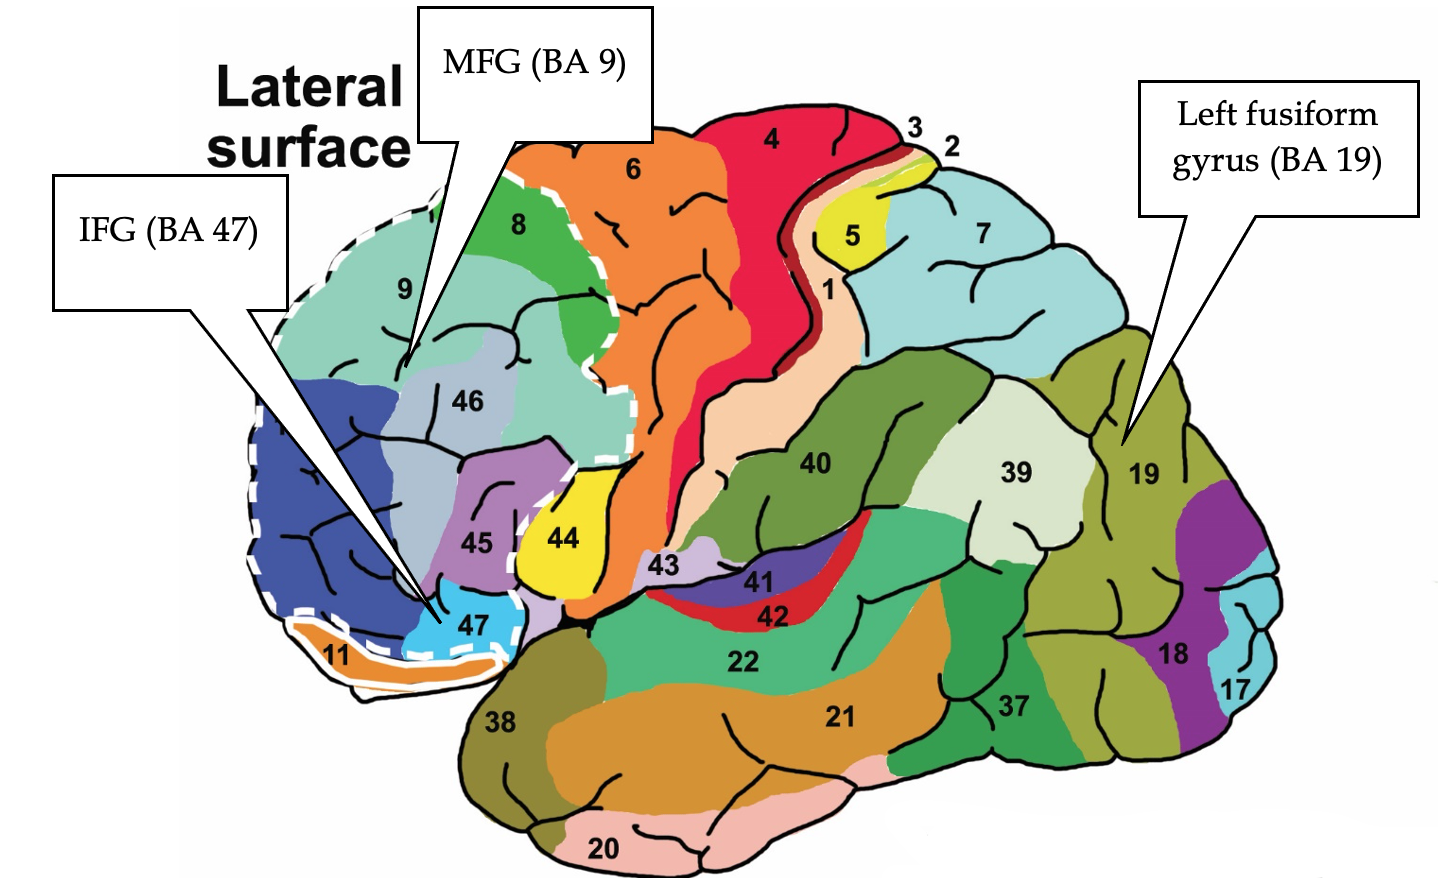 An illustration of the brain. There are 47 sections numbered on the brain. 3 of those sections are highlights and they are: IFG (BA 47), MFG (BA 9), and Left fusiform gyrus (BA 19).